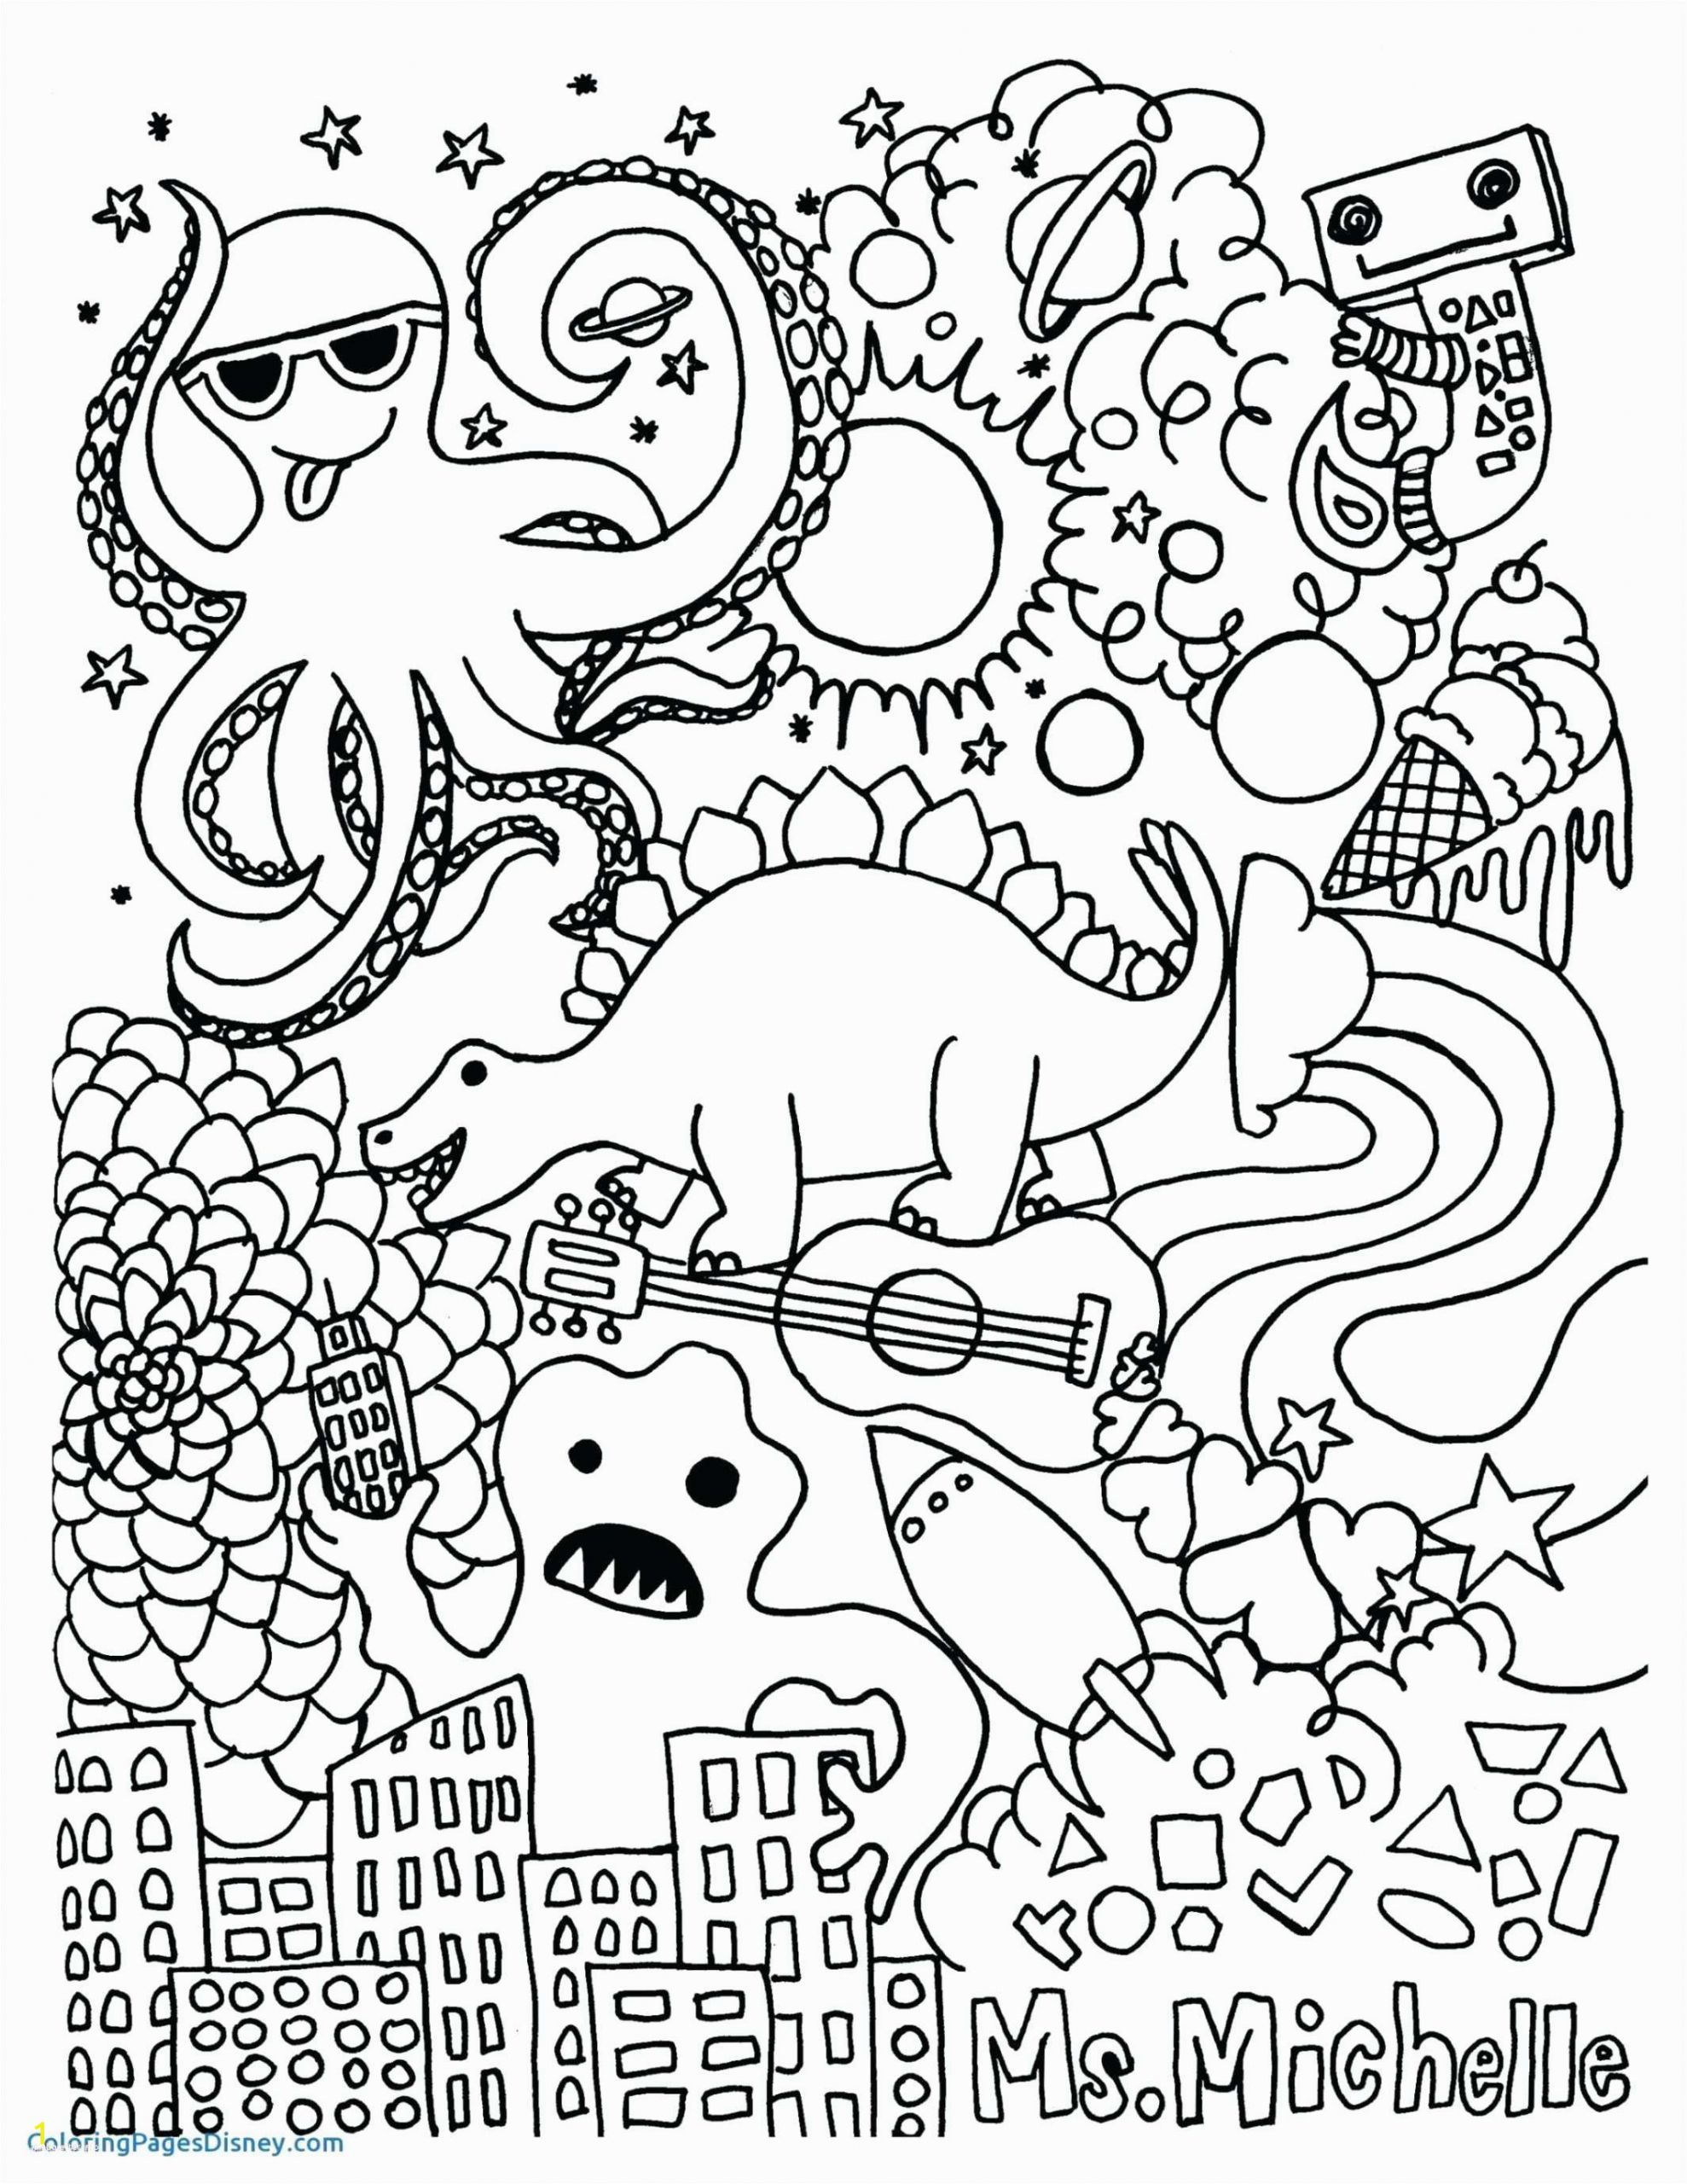 Skeleton Hand Coloring Page Skull Coloring Pages for Adults – Sunbeltsheet